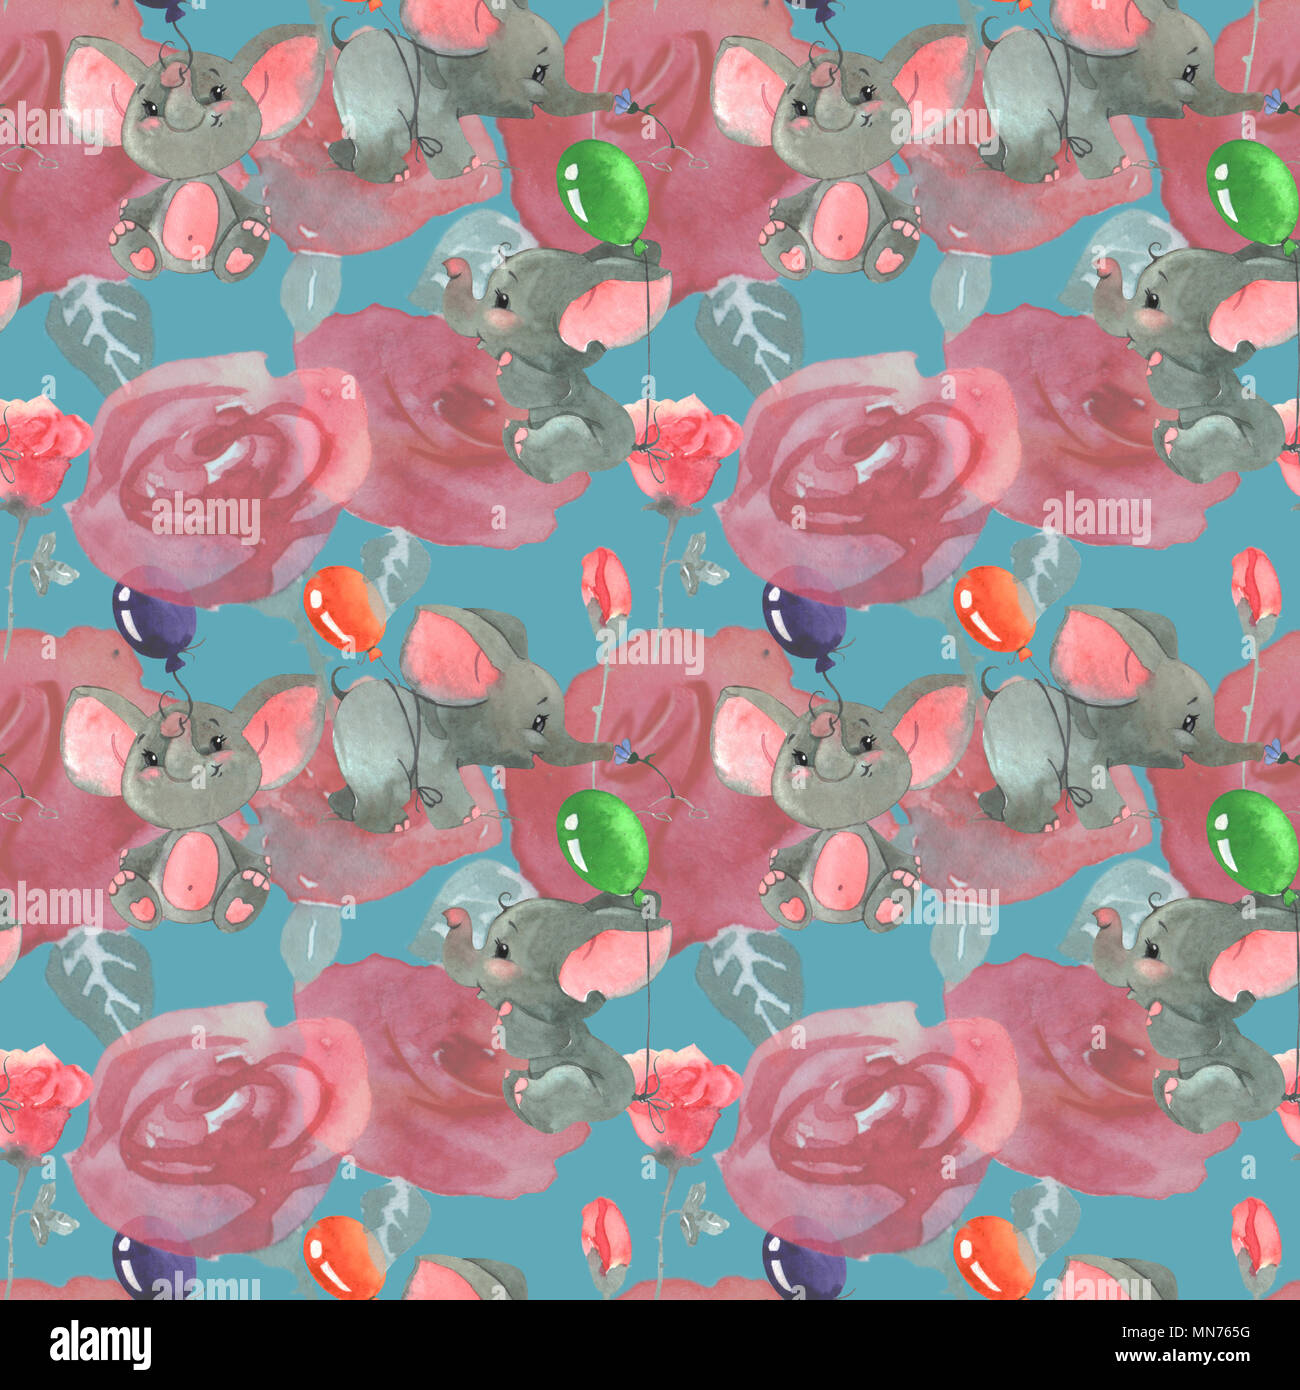 Roses flowers and buds with cute elephants with baloons seamless pattern background Stock Photo